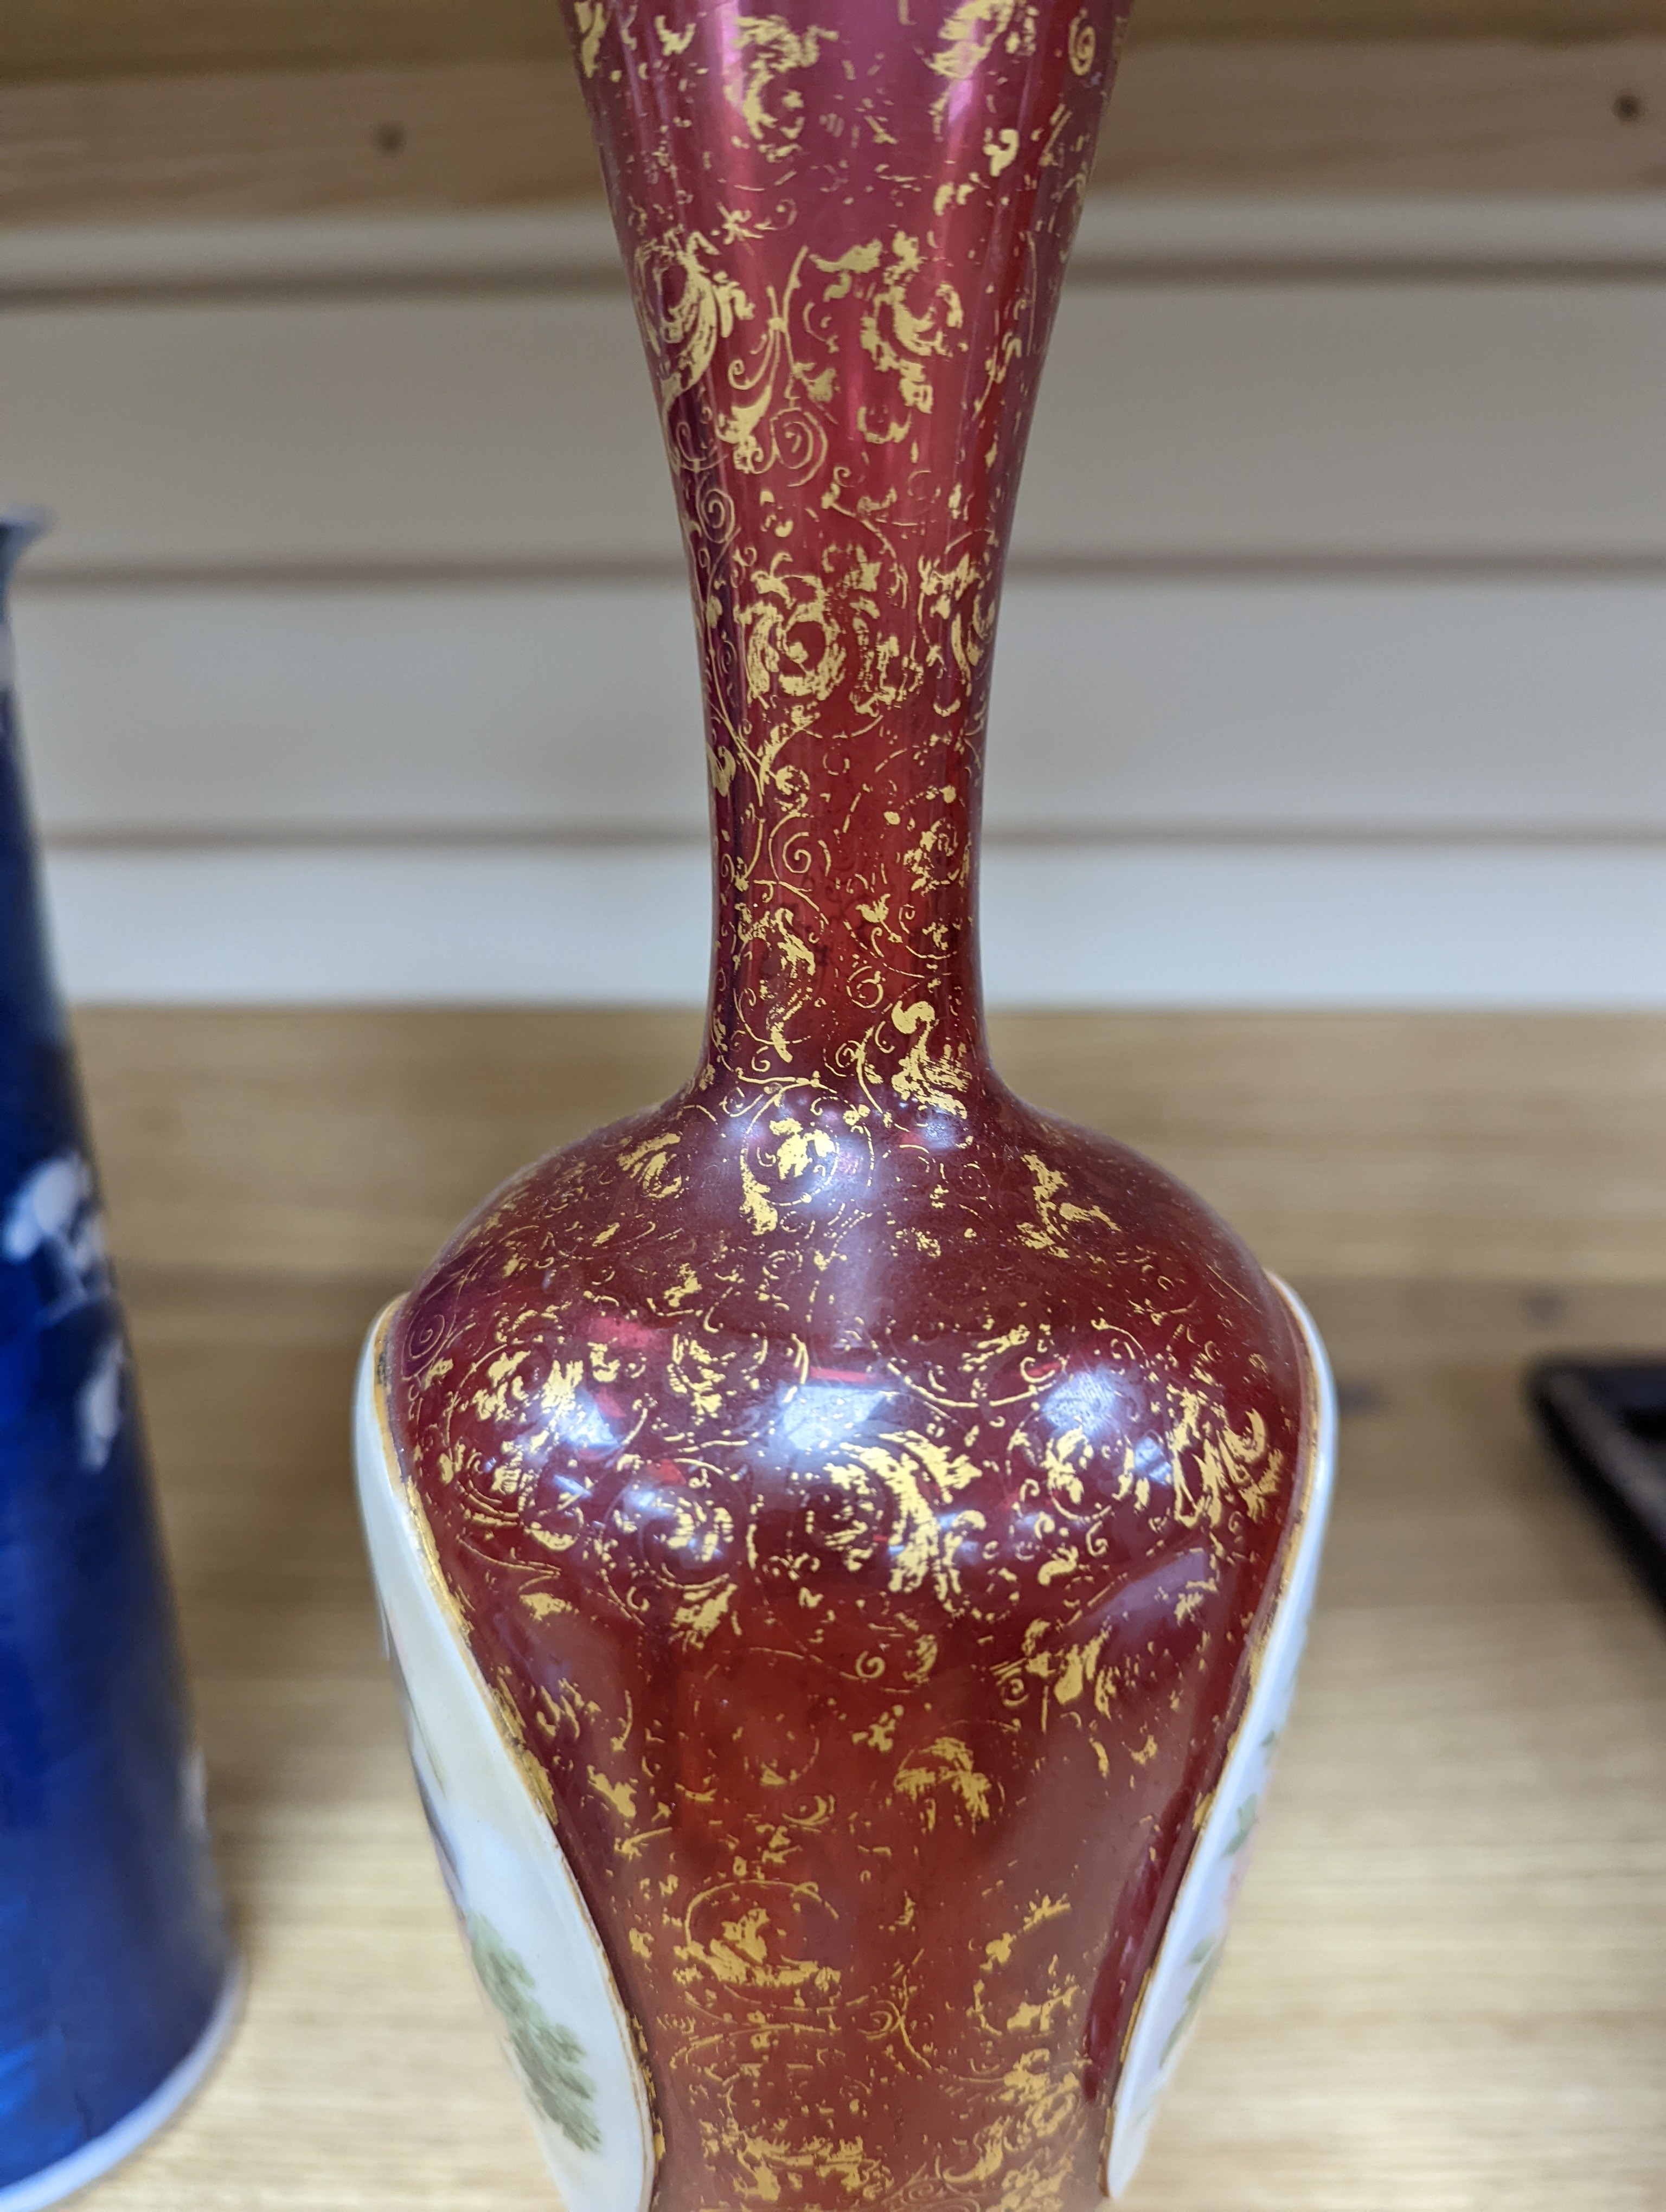 A pair of 19th century Bohemian enamelled and overlaid ruby glass vases 36cm